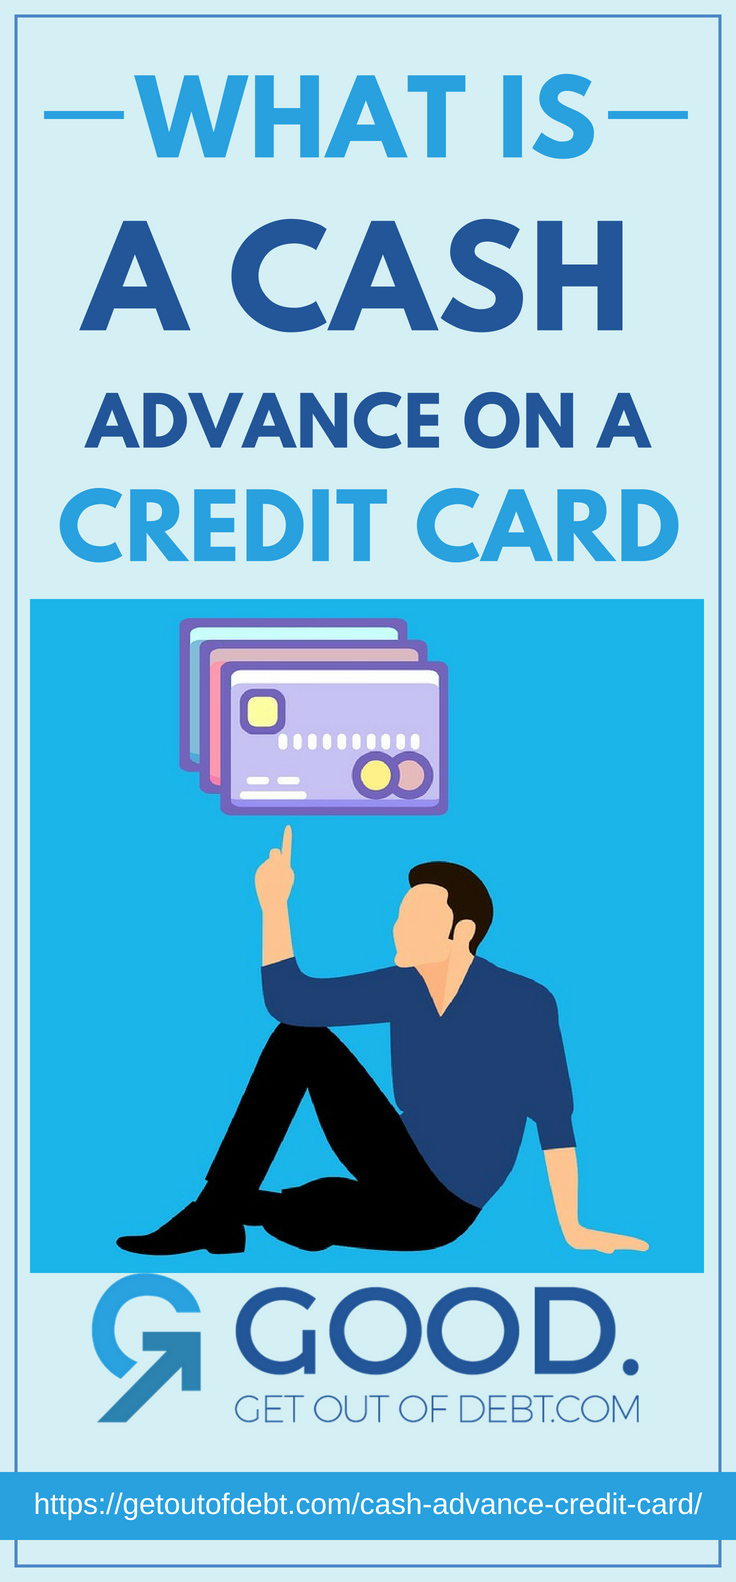 What Is A Cash Advance On A Credit Card